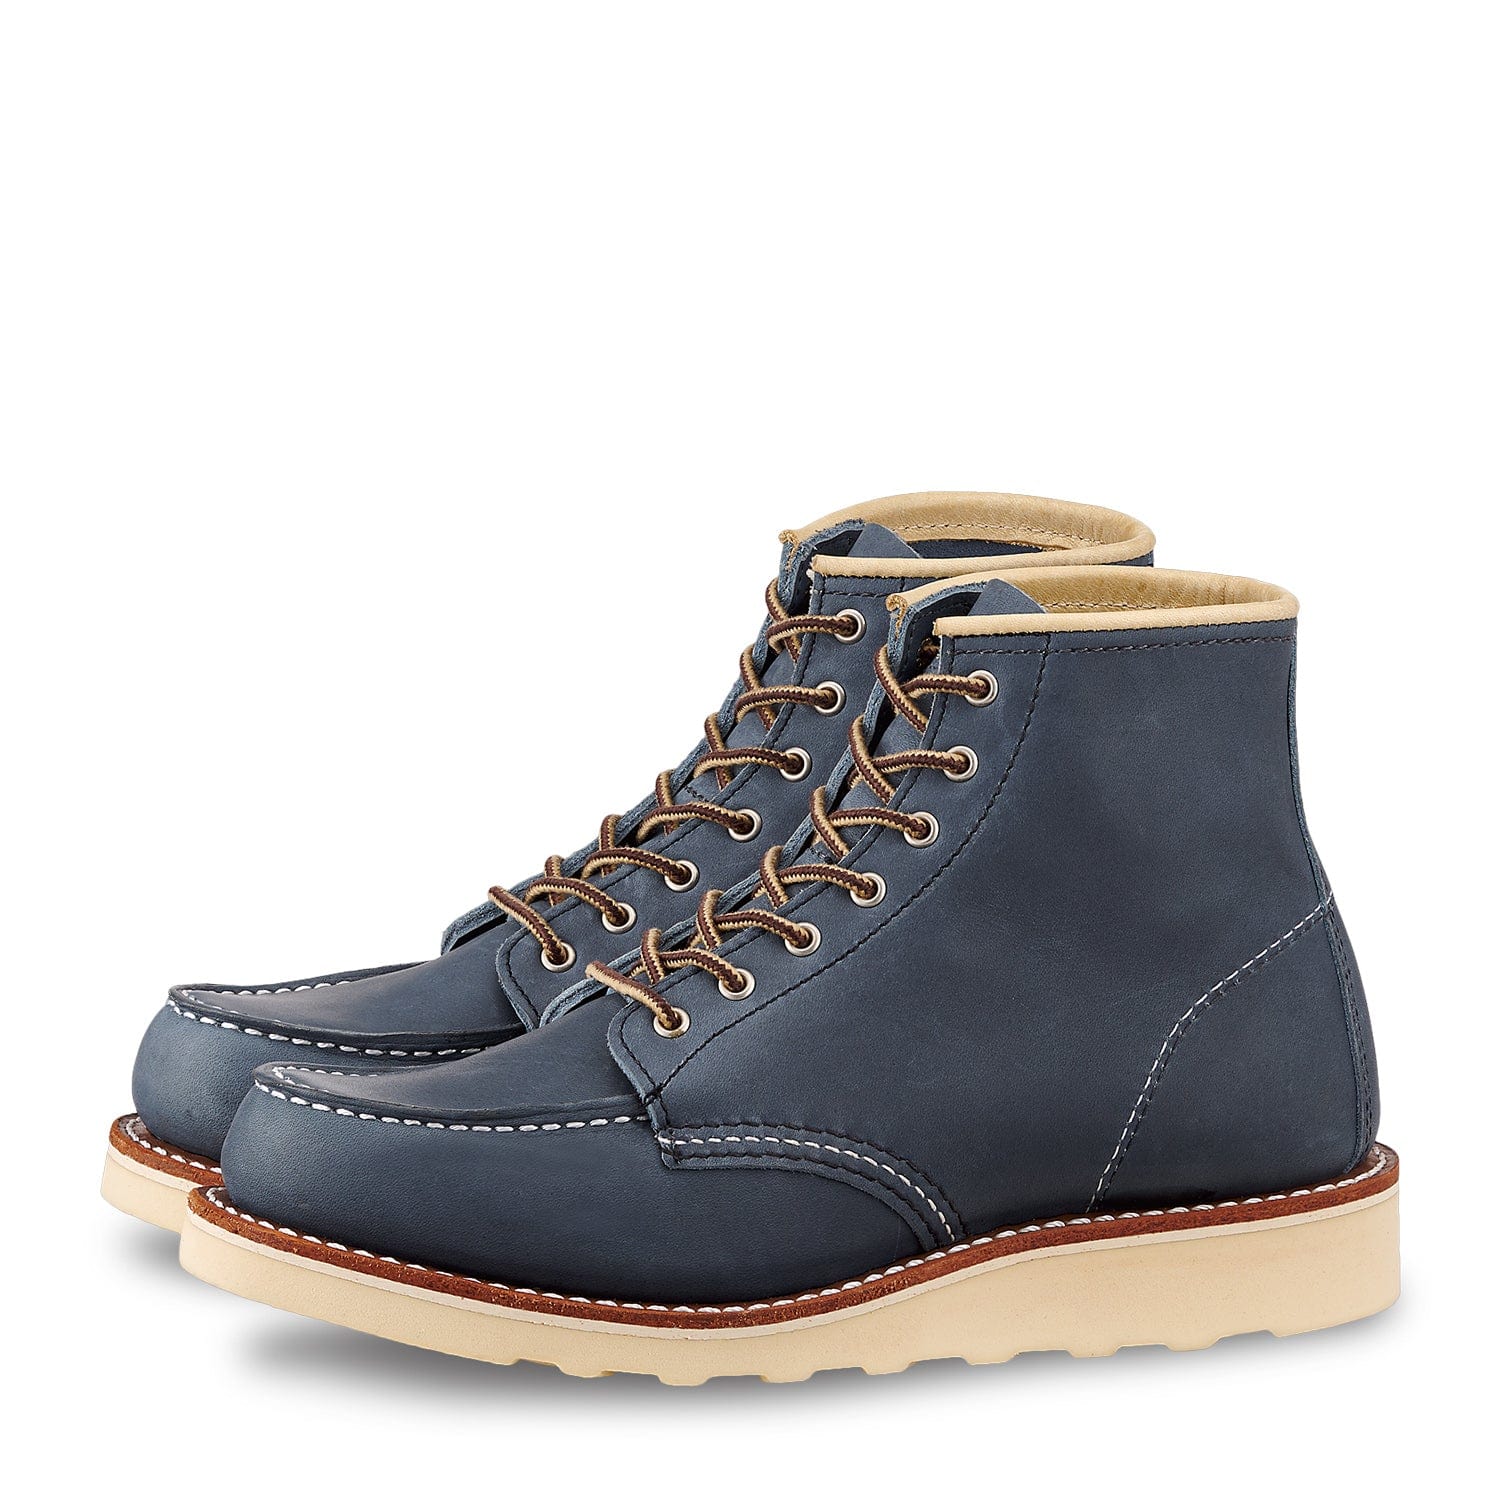 [Linked Image from redwingamsterdam.com]